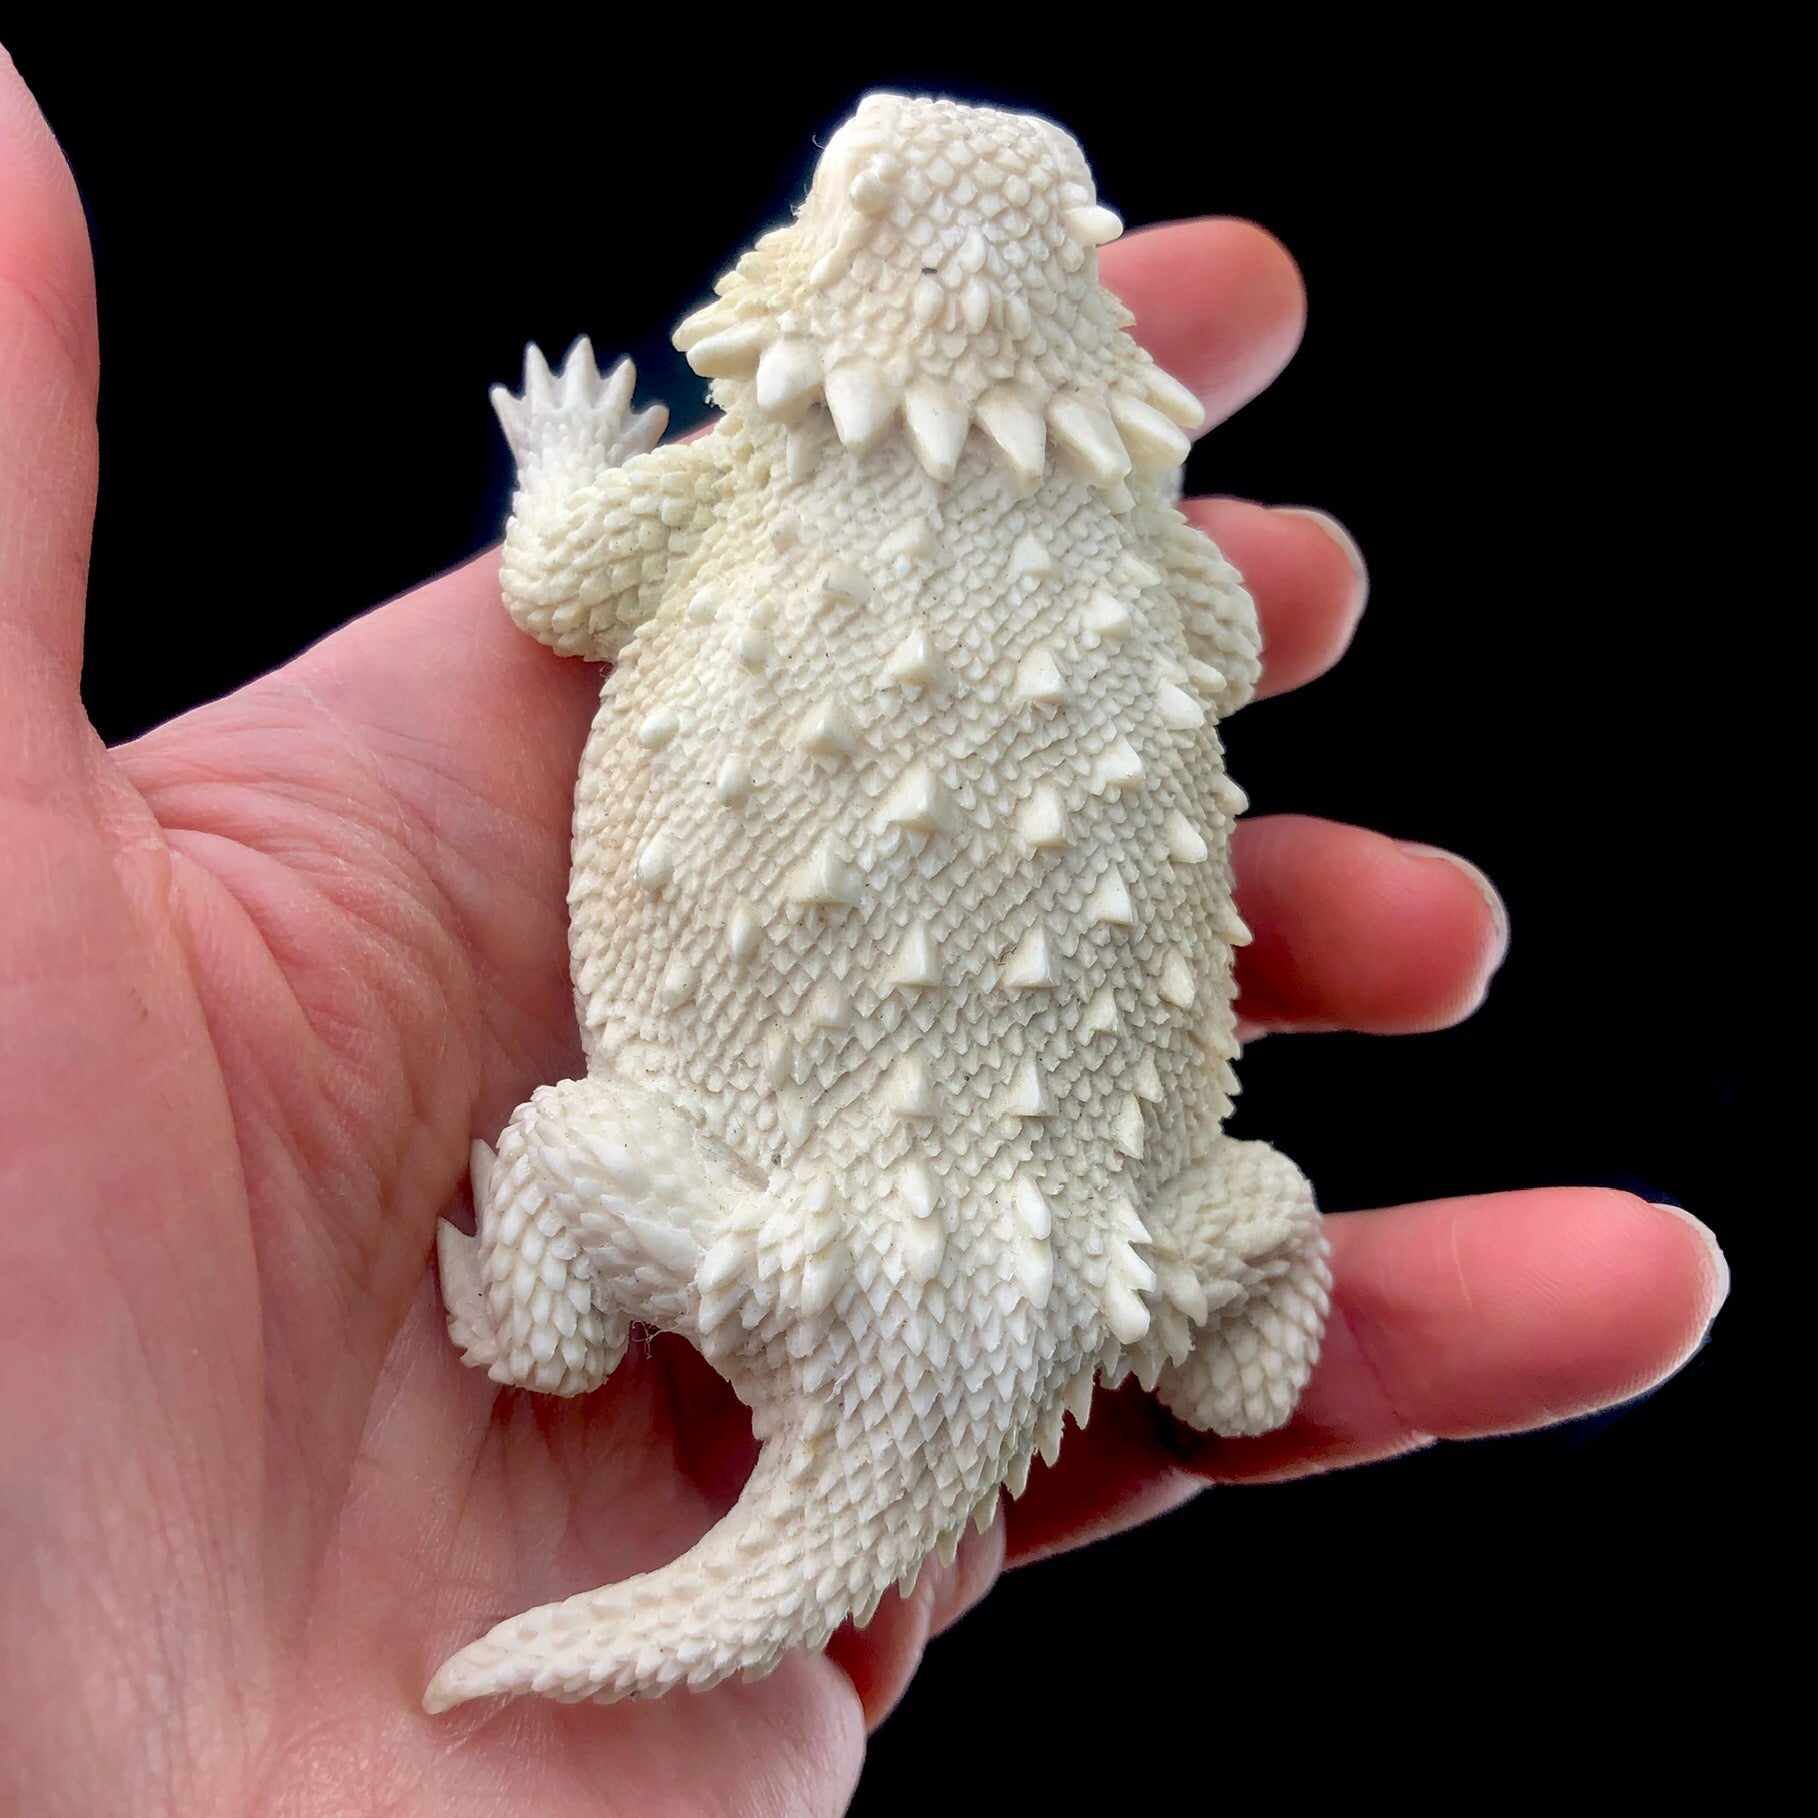 Top view of Horny Toad Carving